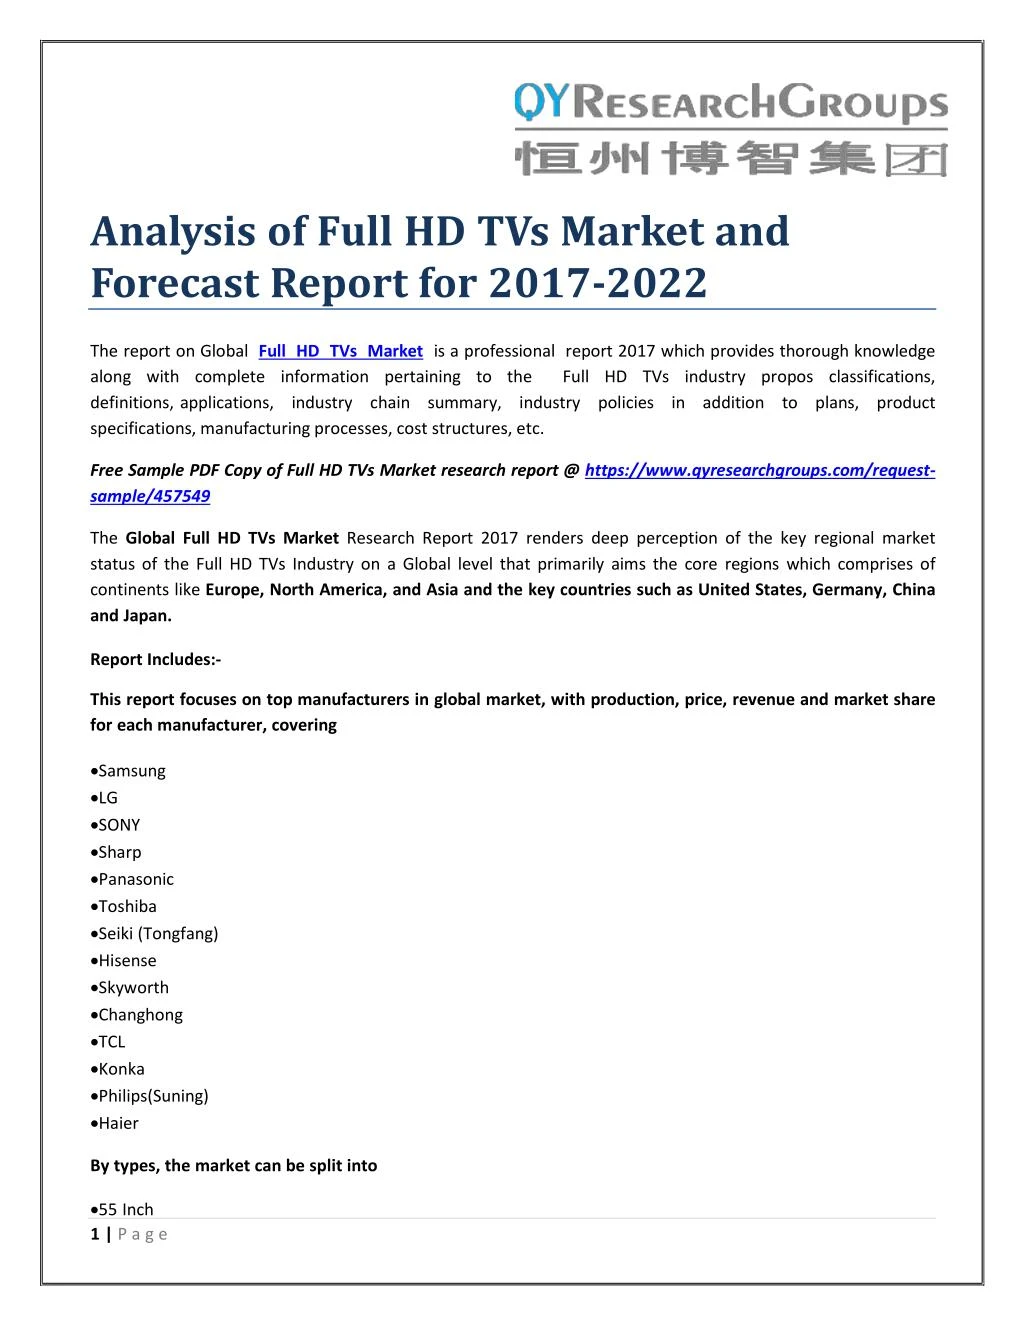 analysis of full hd tvs market and forecast